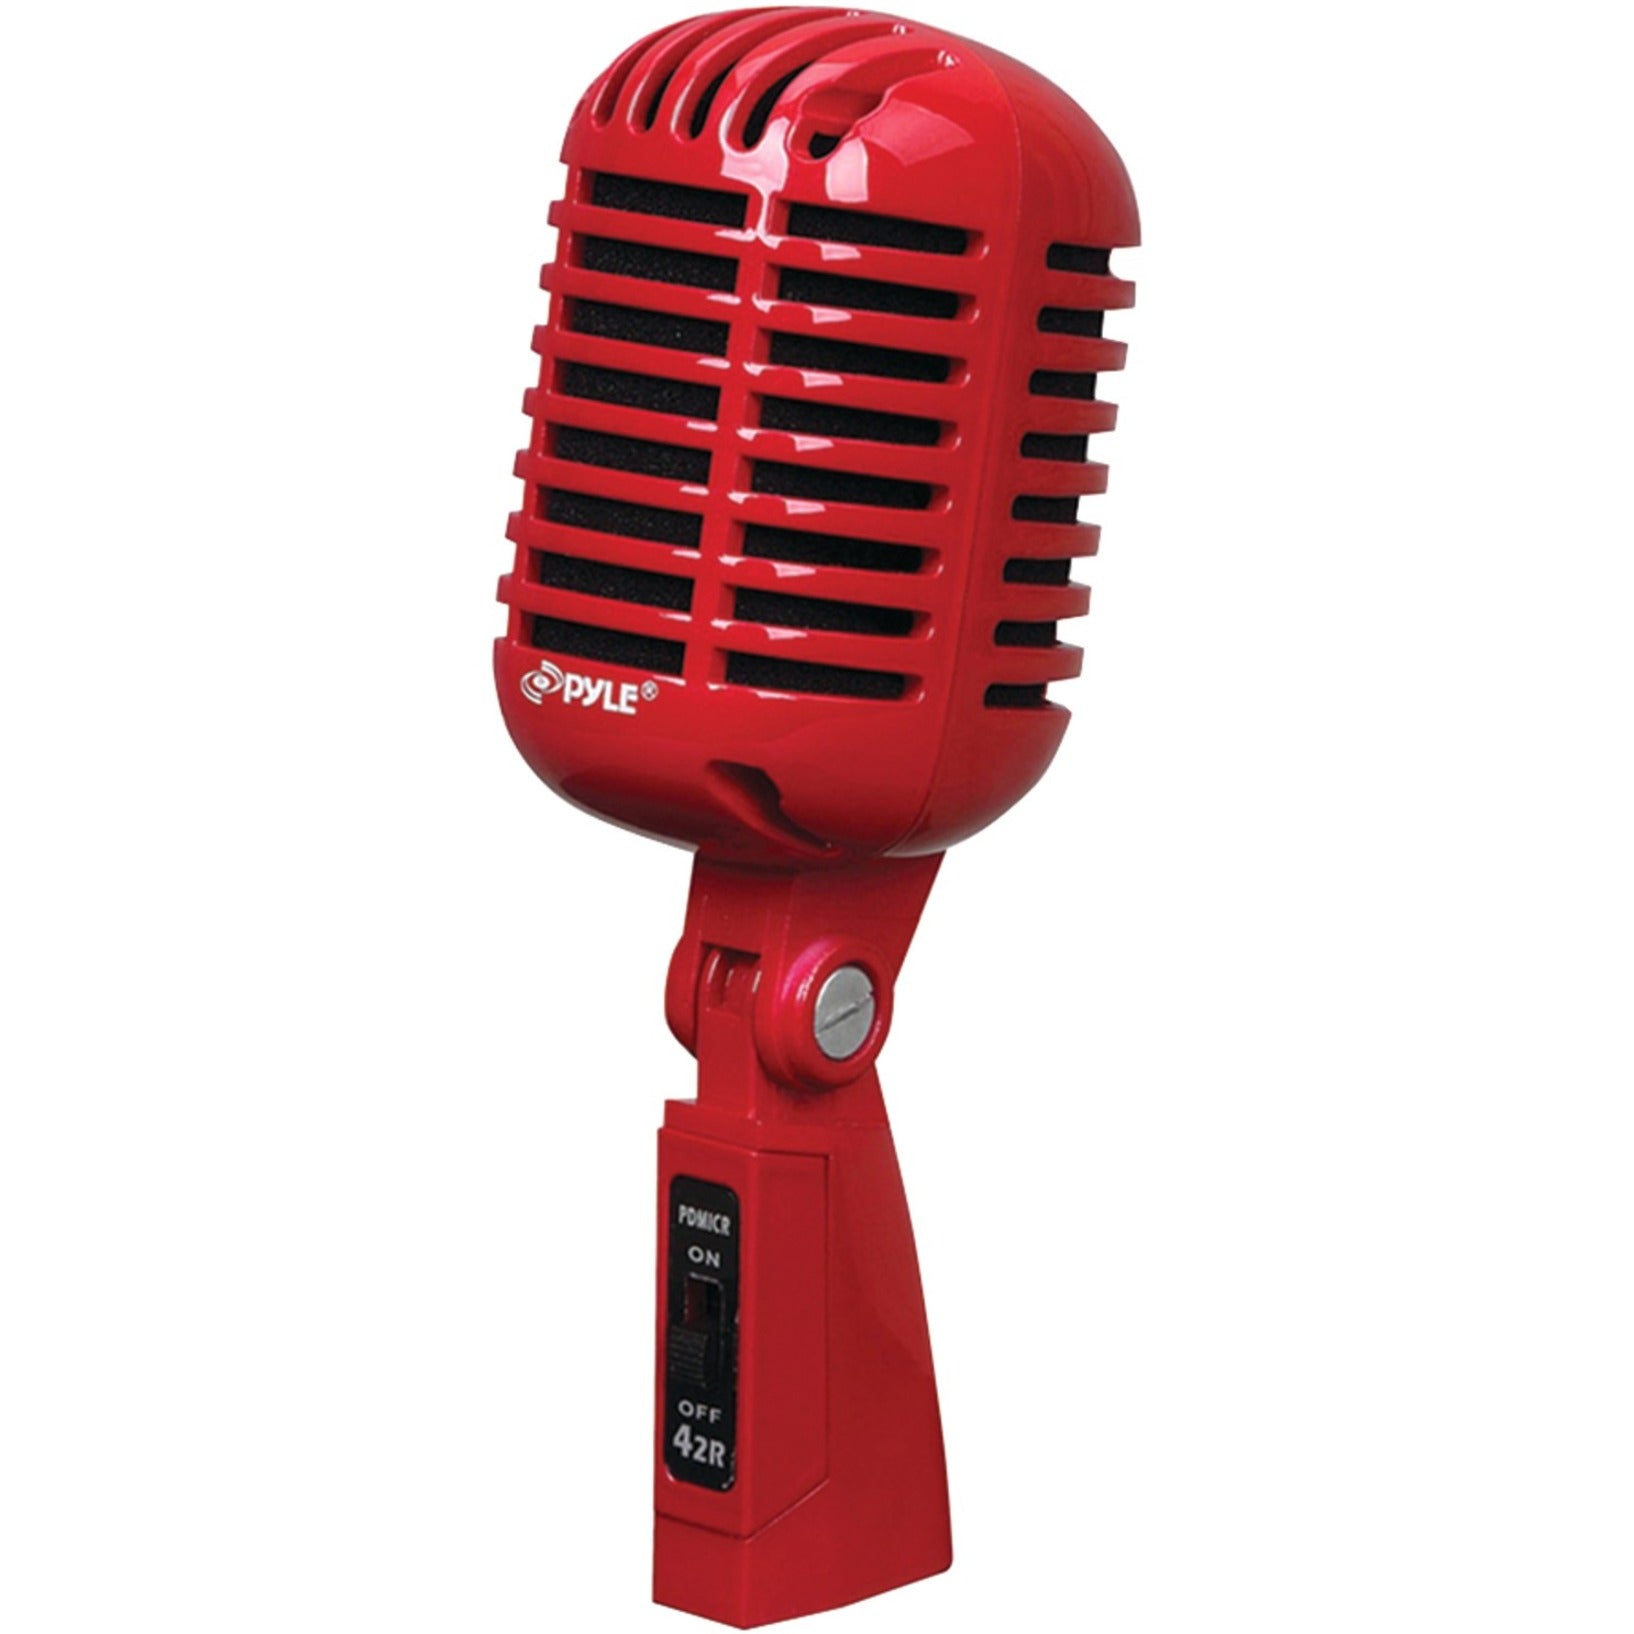 Pyle PDMICR42R Classic Retro Vintage Style Dynamic Vocal Microphone with 16ft XLR Cable (Red), Stand Mountable, -50 dB Sensitivity